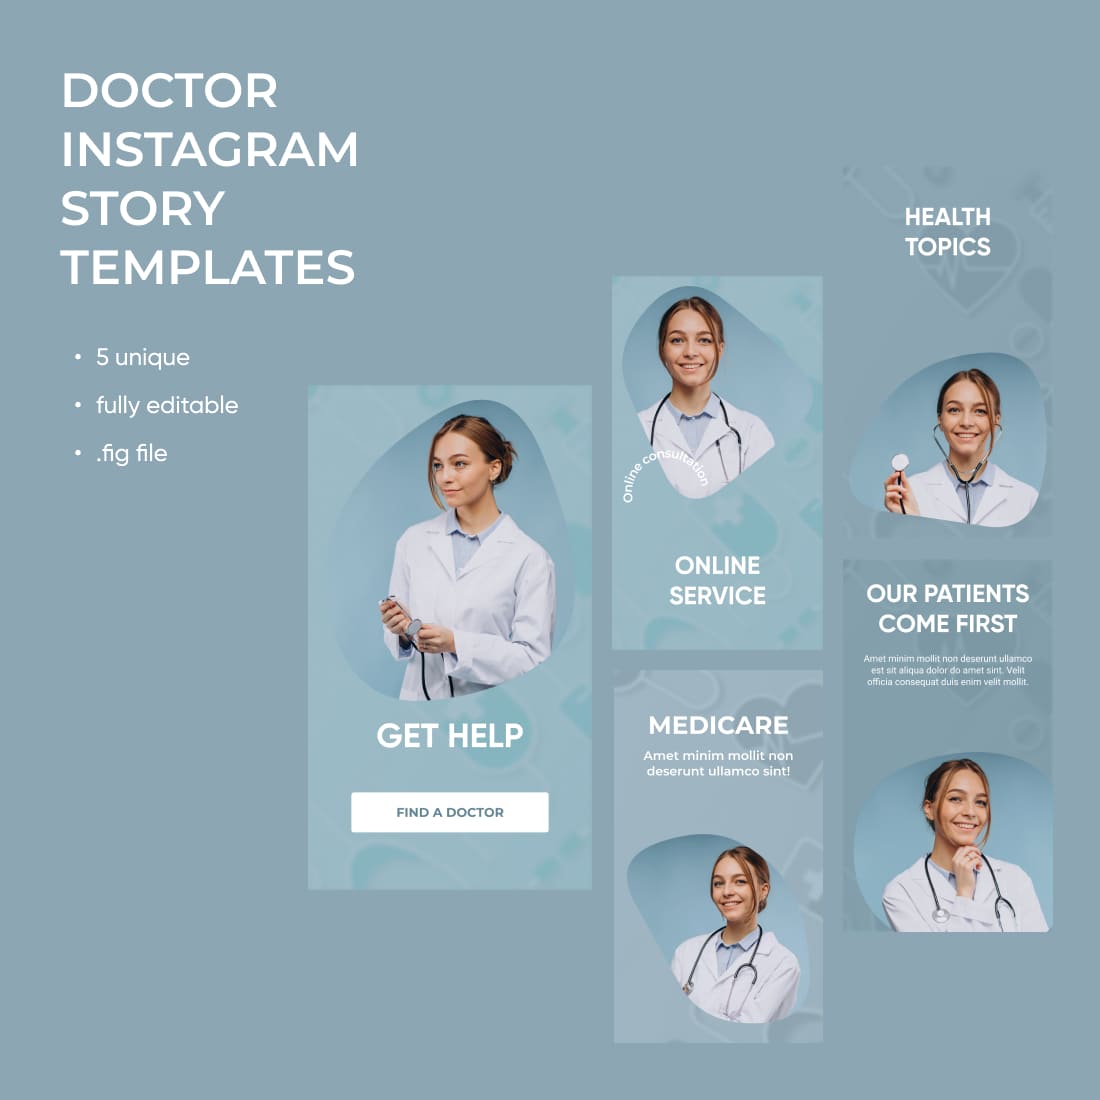 5 doctor instagram Story templates.